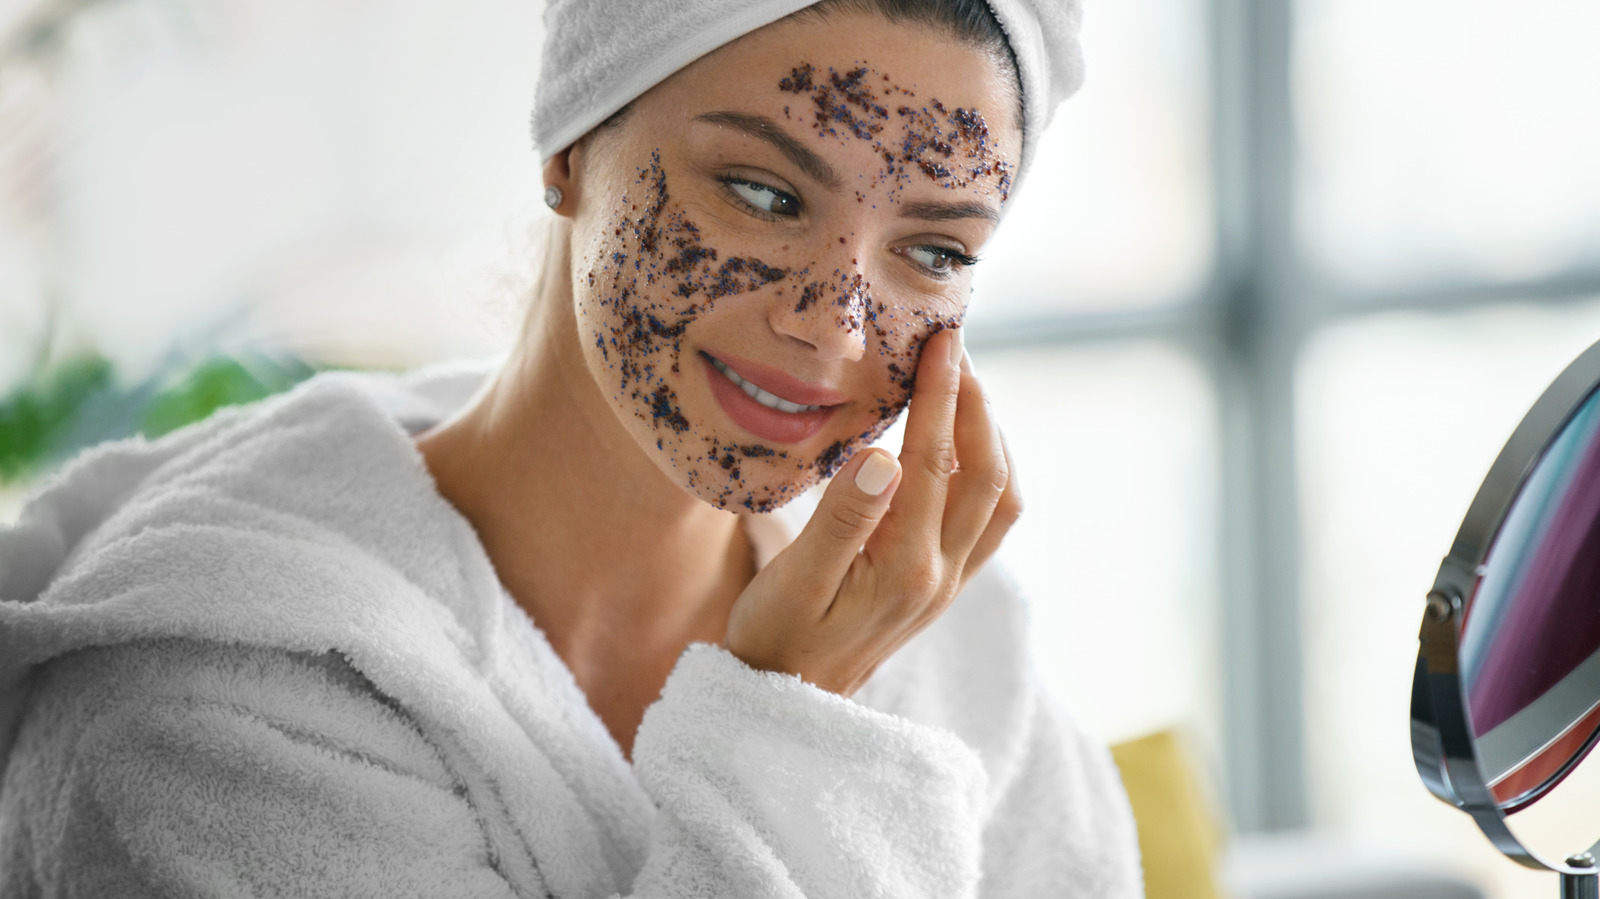 Do Physical Exfoliants Really Deserve The Bad Rep? Our Derm Weighs In picture photo